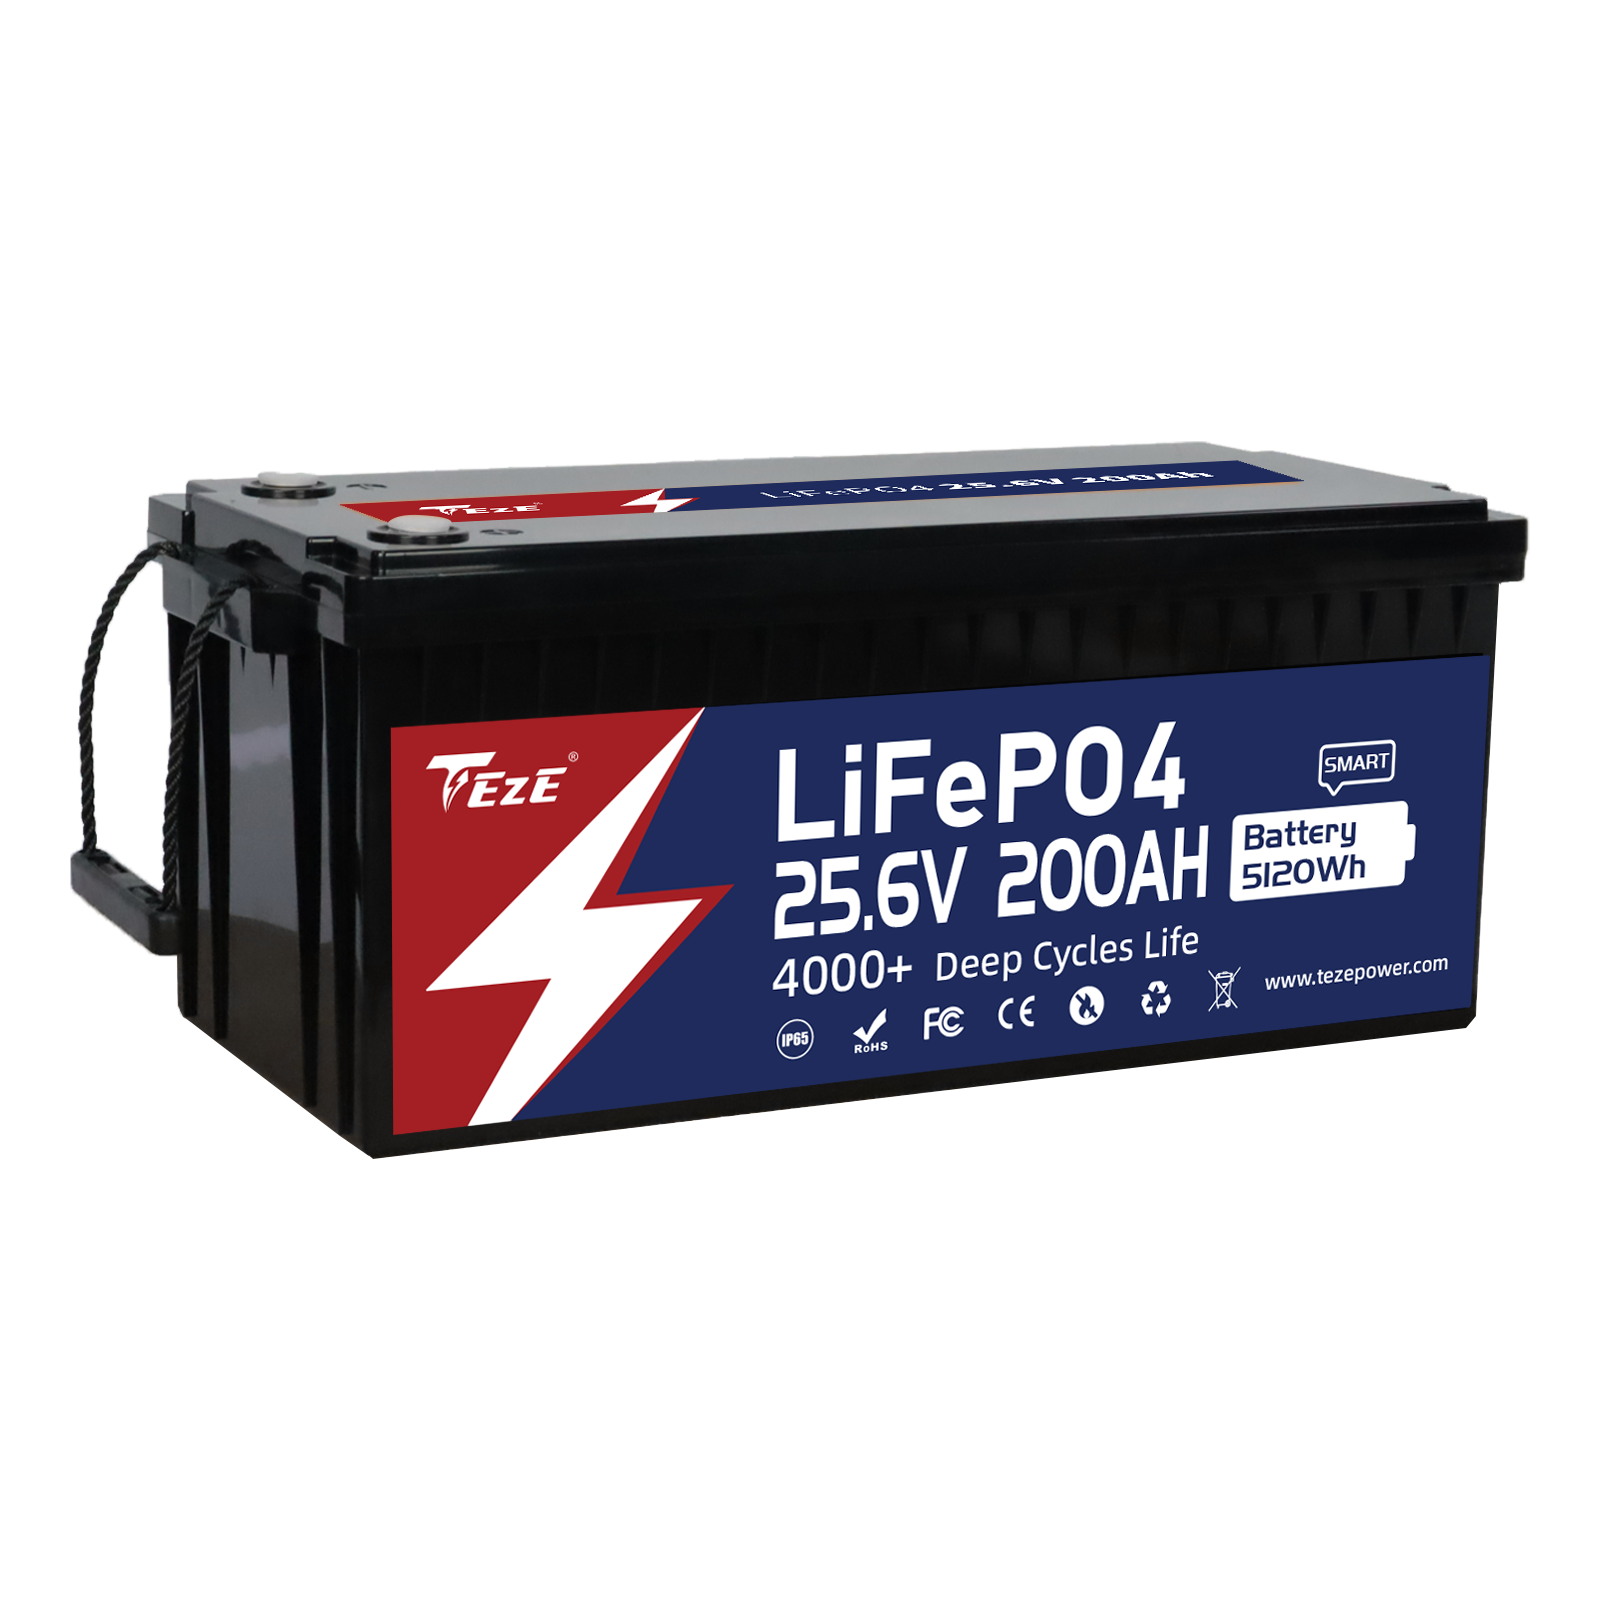 TezePower 24V 200Ah LiFePO4 Batterie with Bluetooth, Self-heating and  Active Balancer, Built-in 200A Daly BMS(Bluetooth Built-in Version)